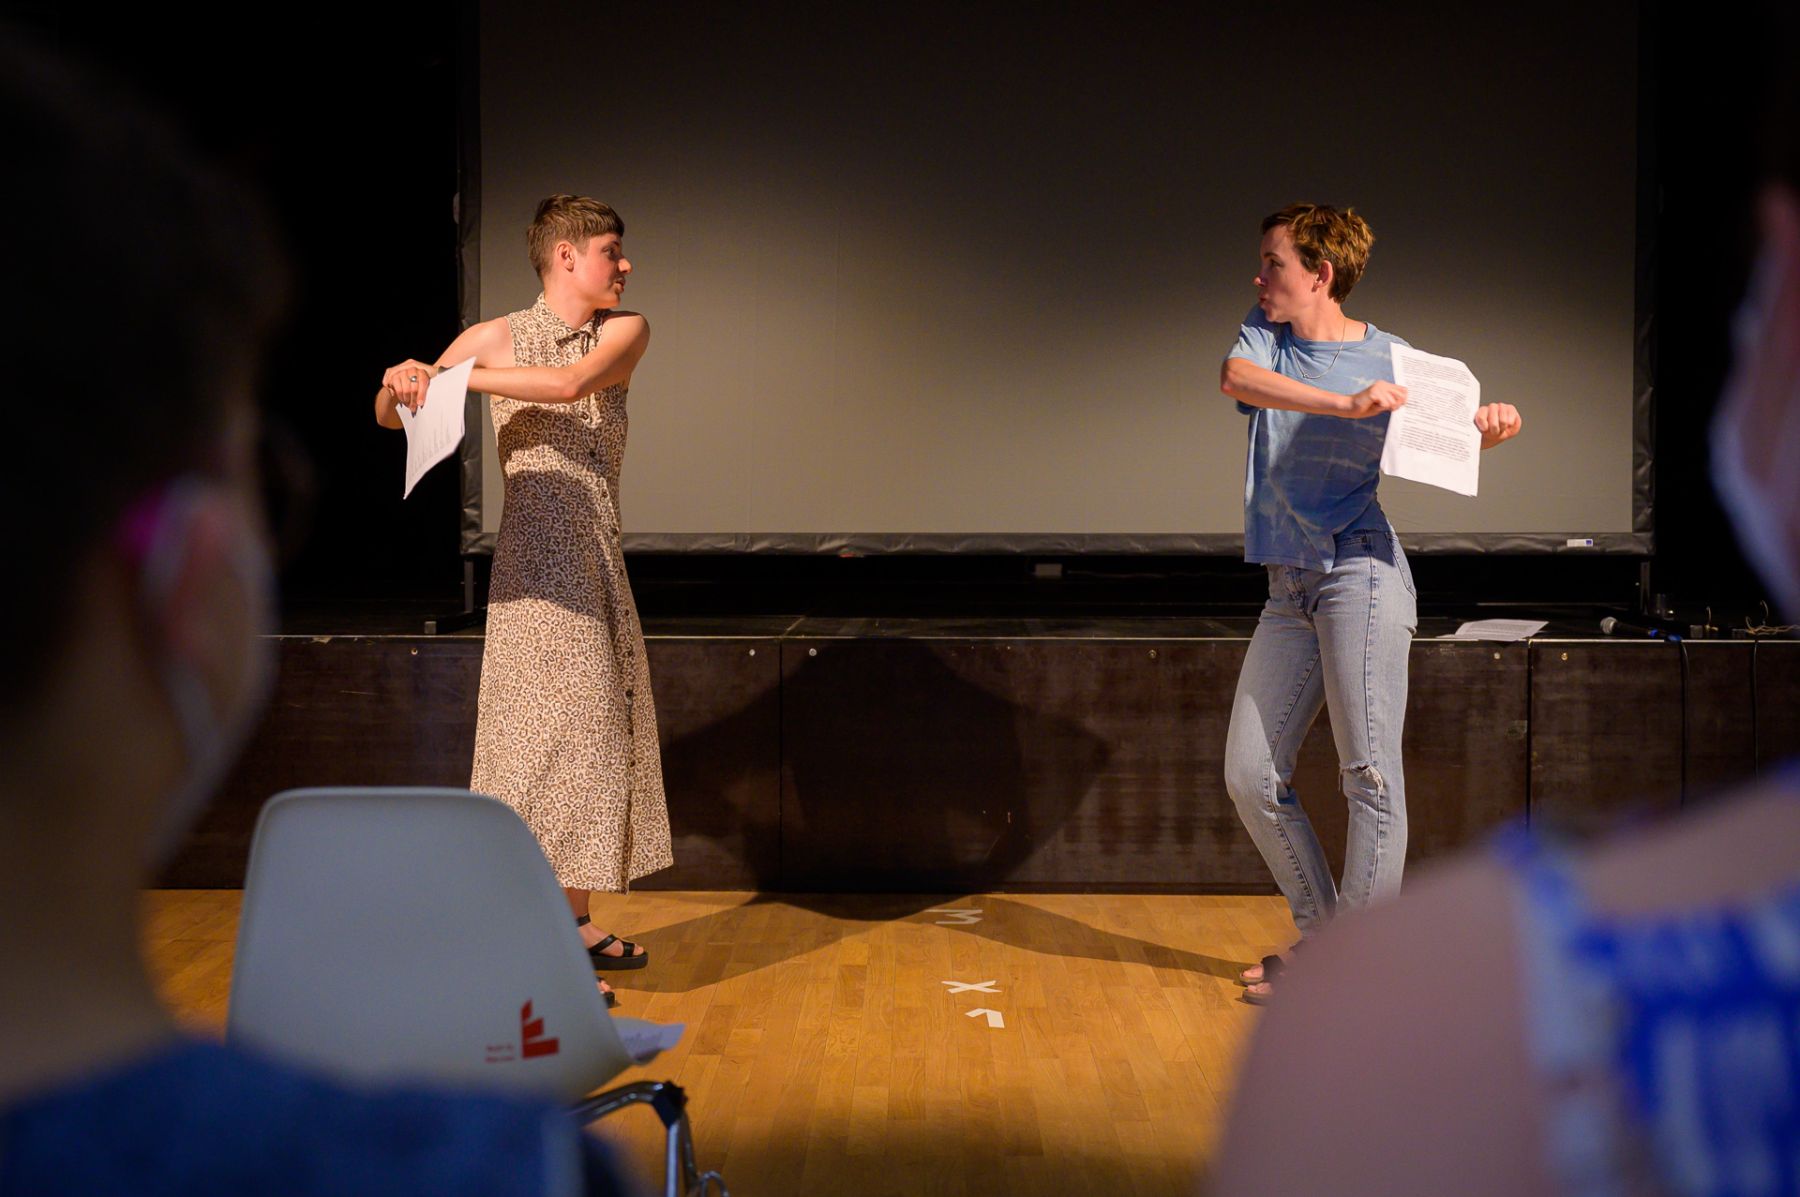 Laurie Mlodzik (left) and Inka Meißner (right) at the performative Reading BUSINESS CLASS at Literaturhaus Freiburg.
Foto: Marc Doradzillo